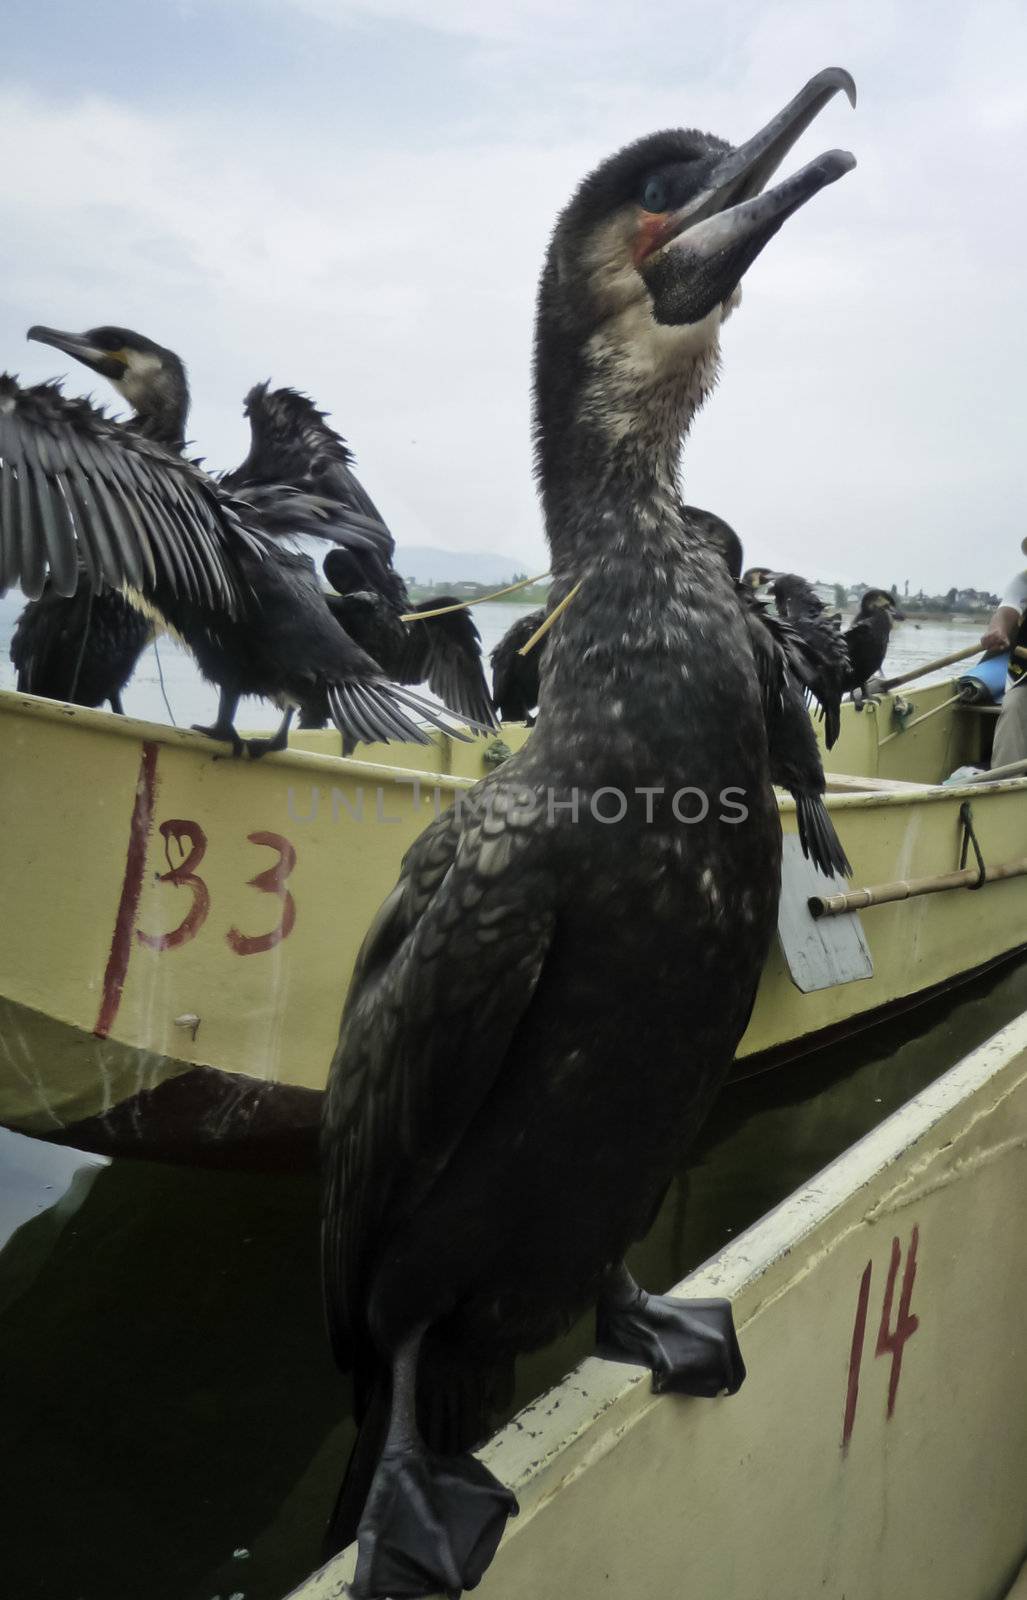 A comorant perches on a boat while fishing in Dali, China